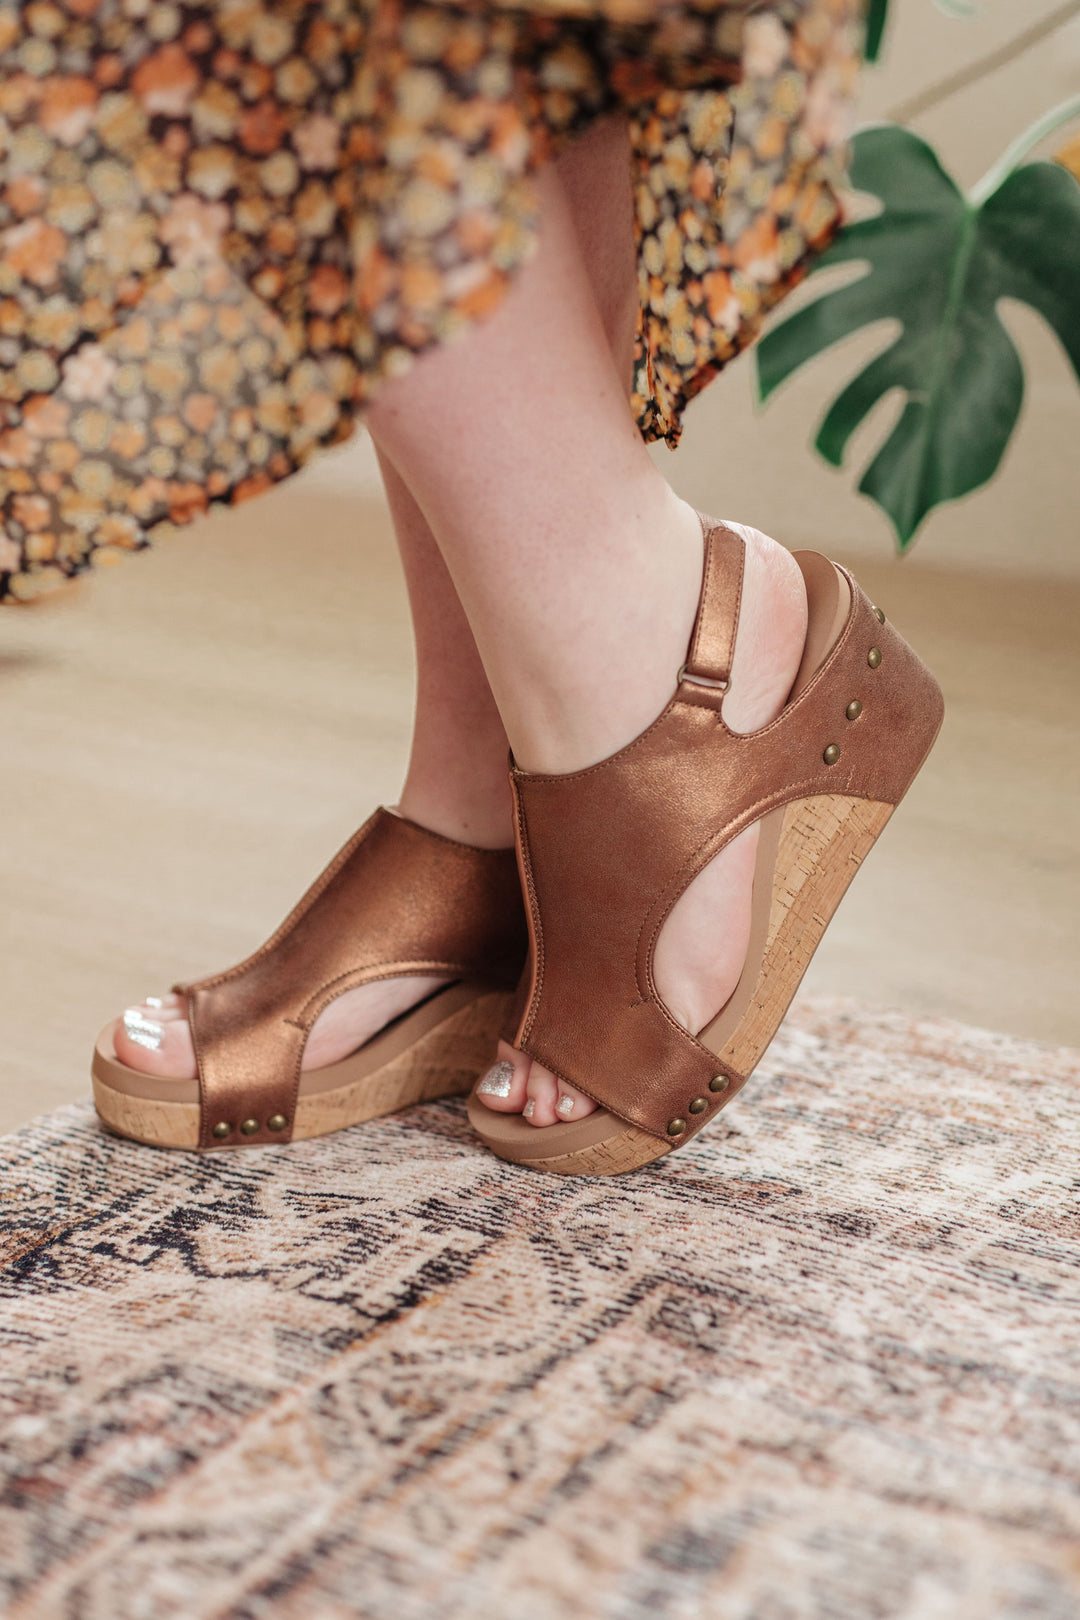 Walk This Way Wedge Sandals in Antique Bronze-Shoes-Inspired by Justeen-Women's Clothing Boutique in Chicago, Illinois